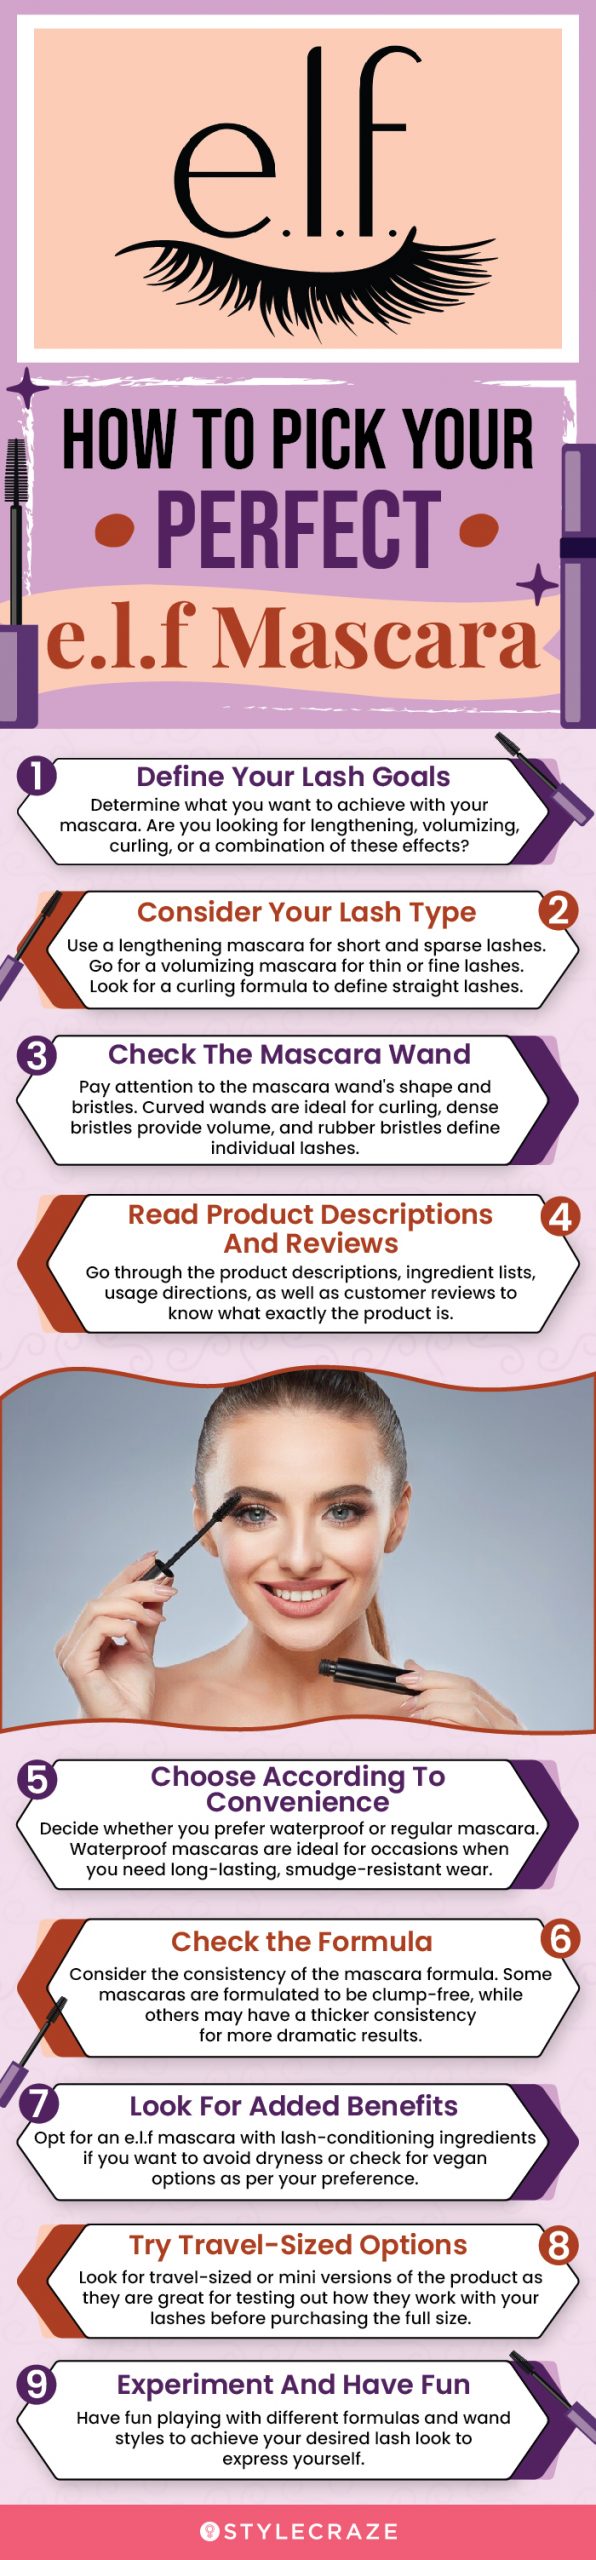 How To Pick Your Perfect e.l.f Mascara (infographic)